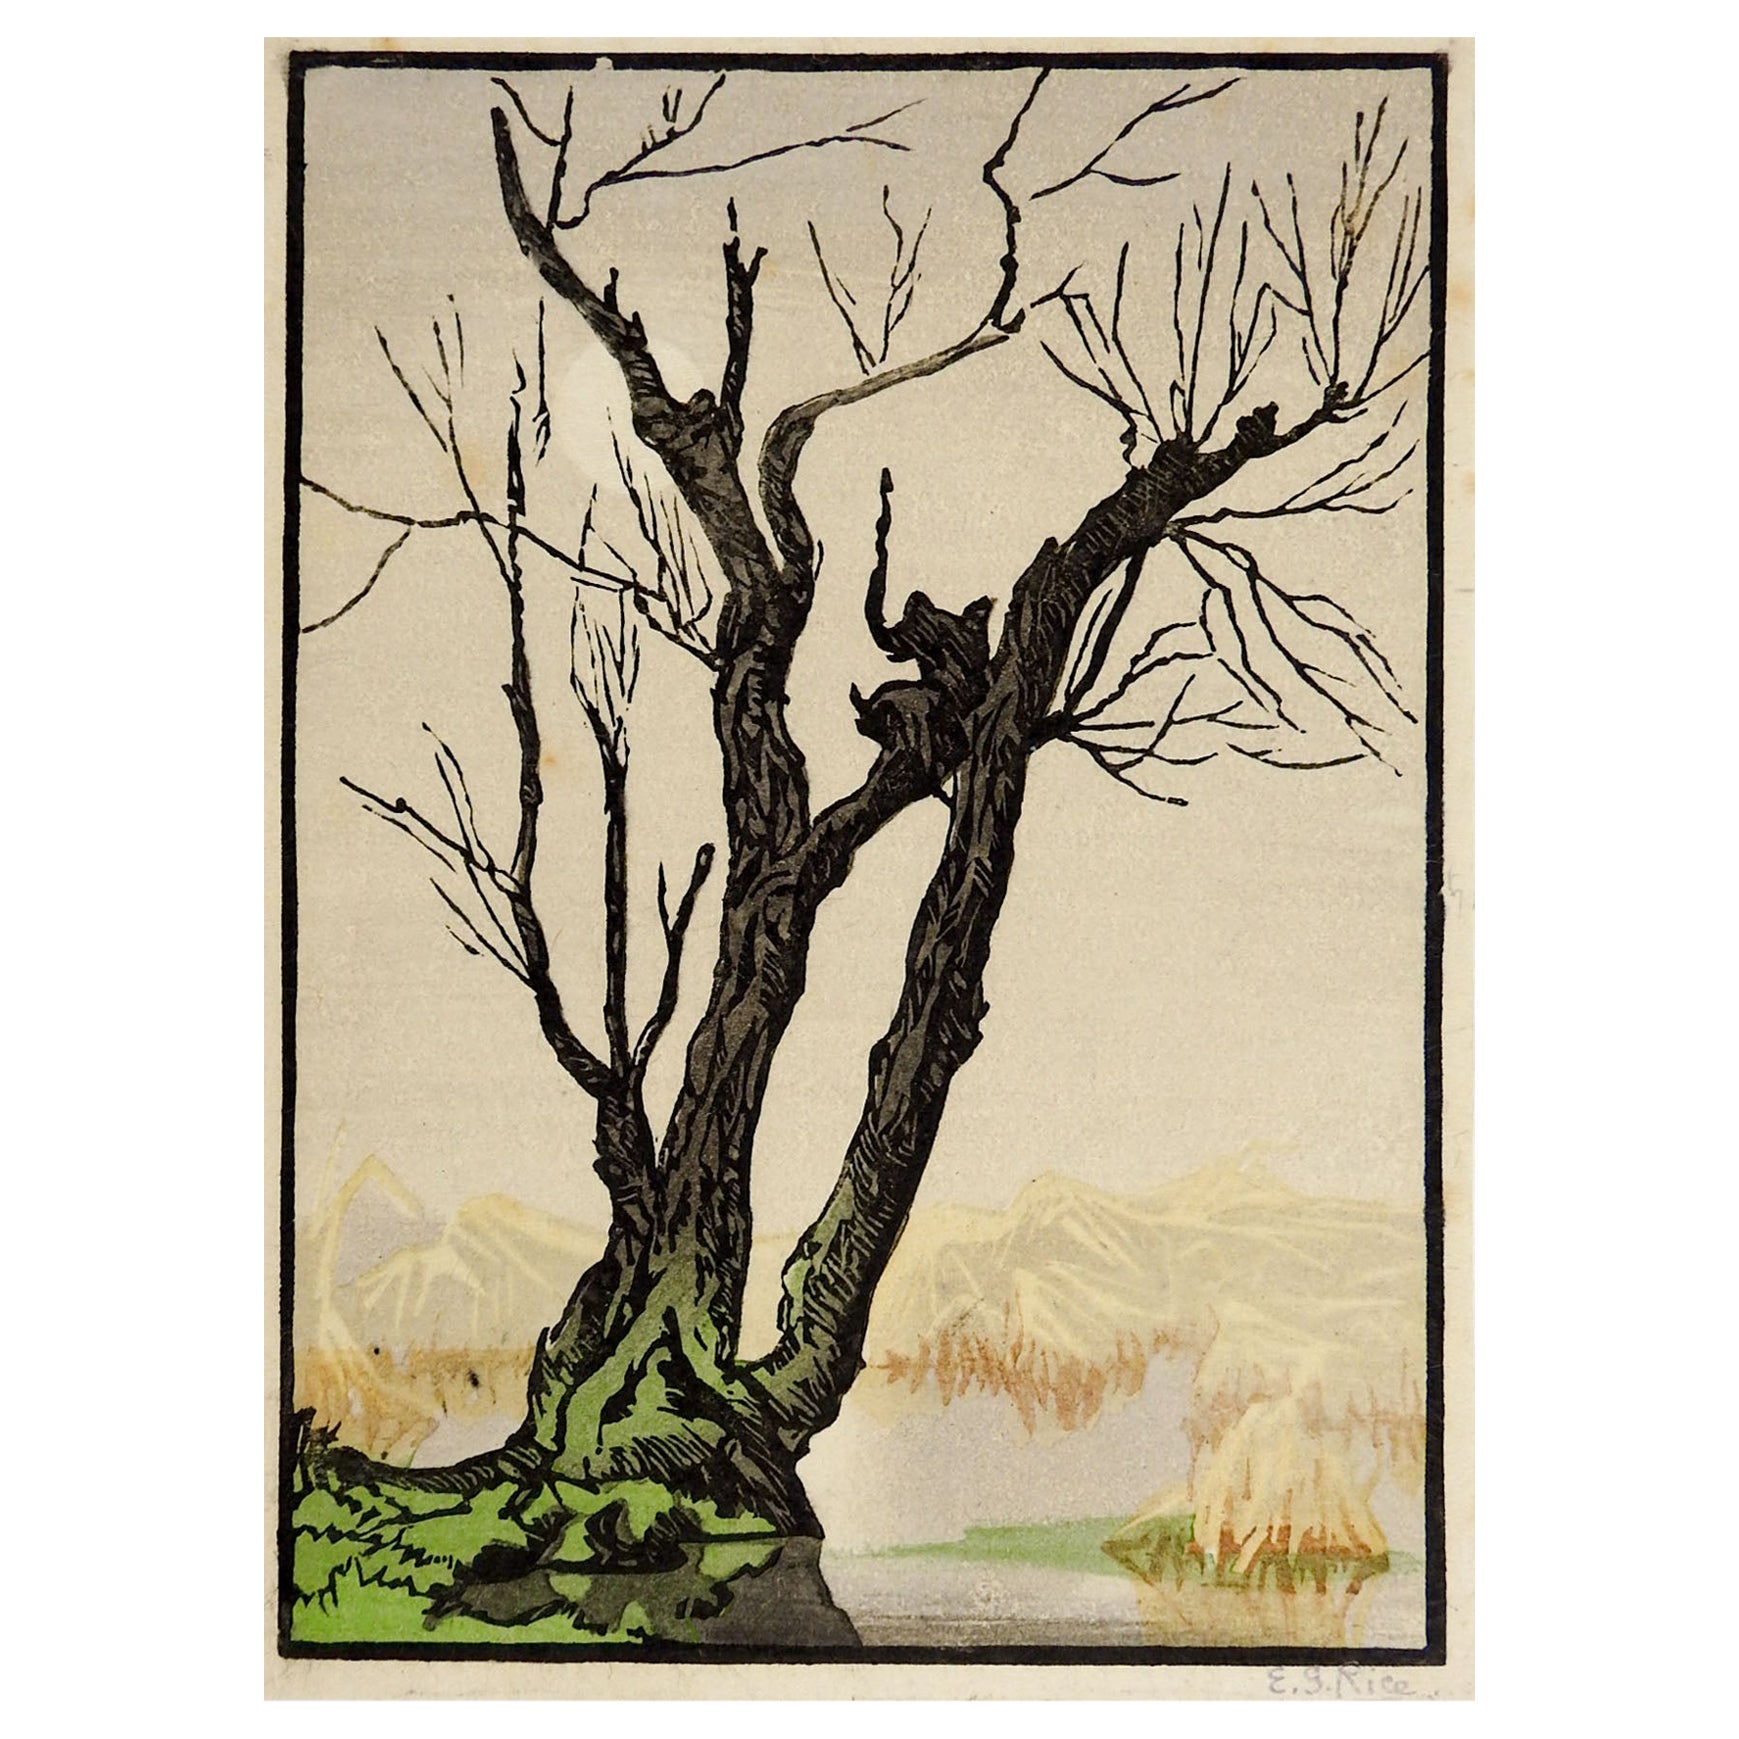 Woodcut in color on paper of old tree in the mountains foggy day by Elsie Garrett Rice (1869-1923) England/South Africa. Signed E. G. Rice in pencil lower right margin. Unframed, edge wear.